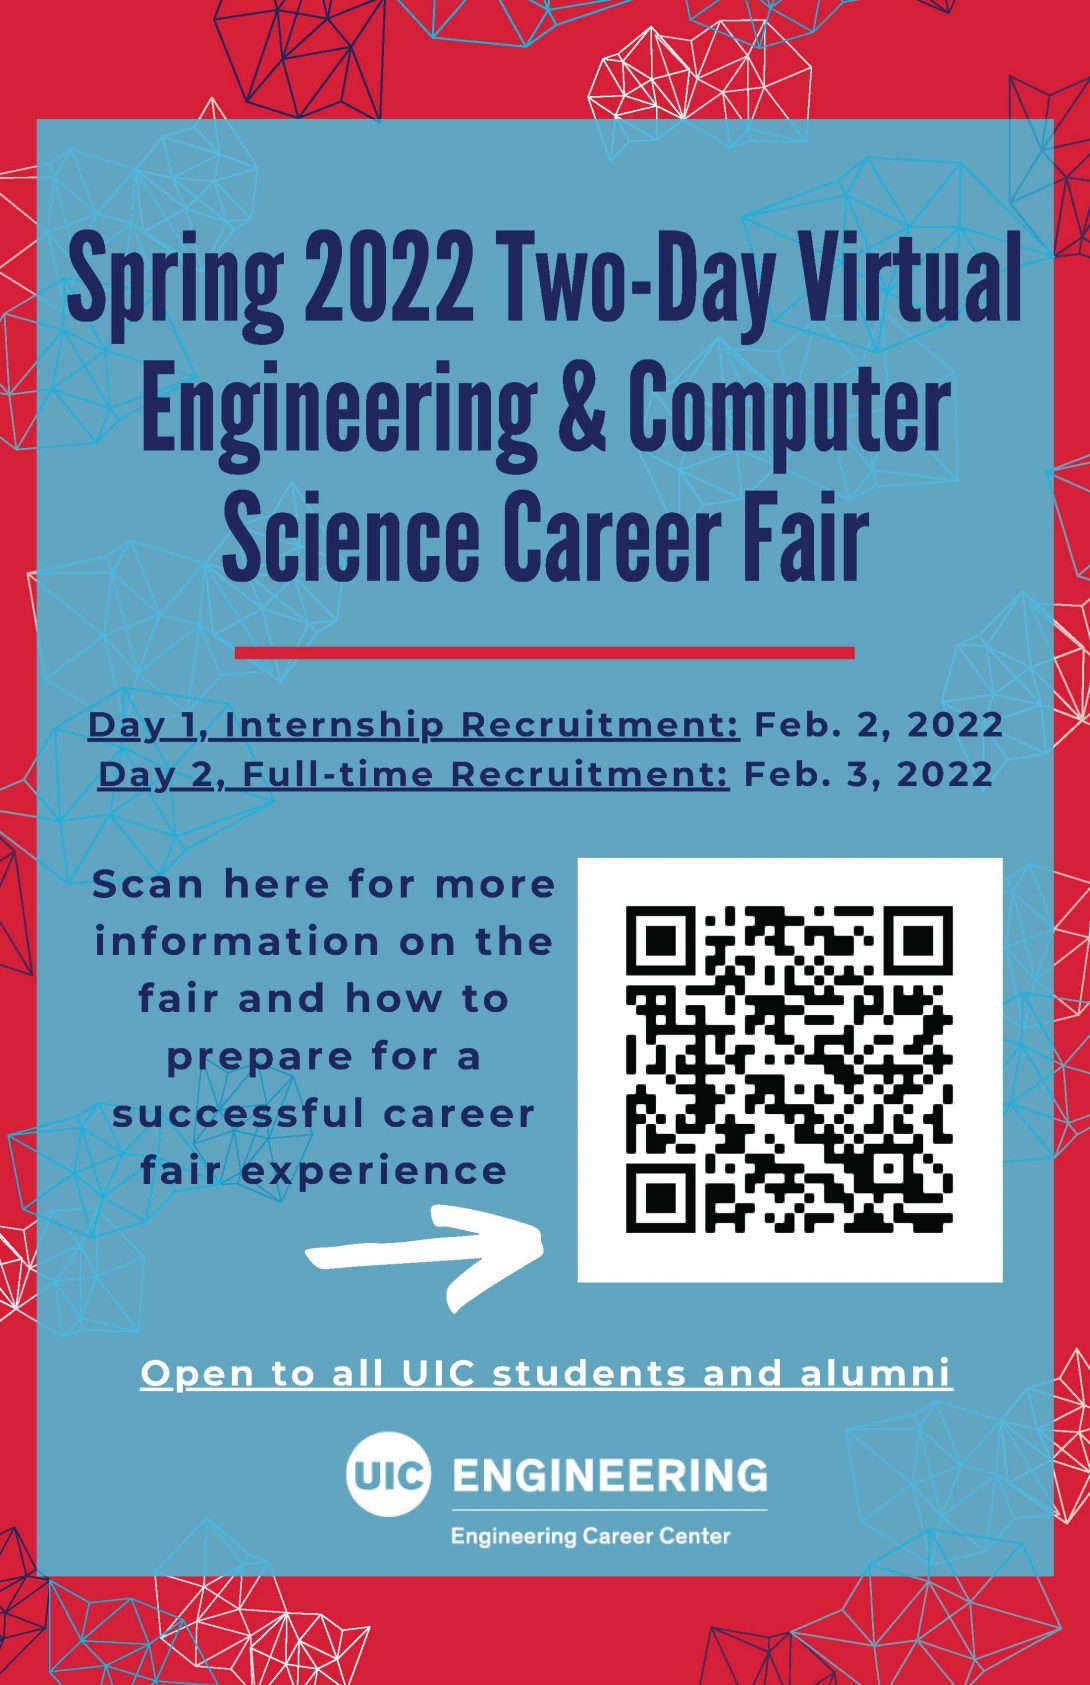 TwoDay Engineering and Computer Science Career Fair Department of